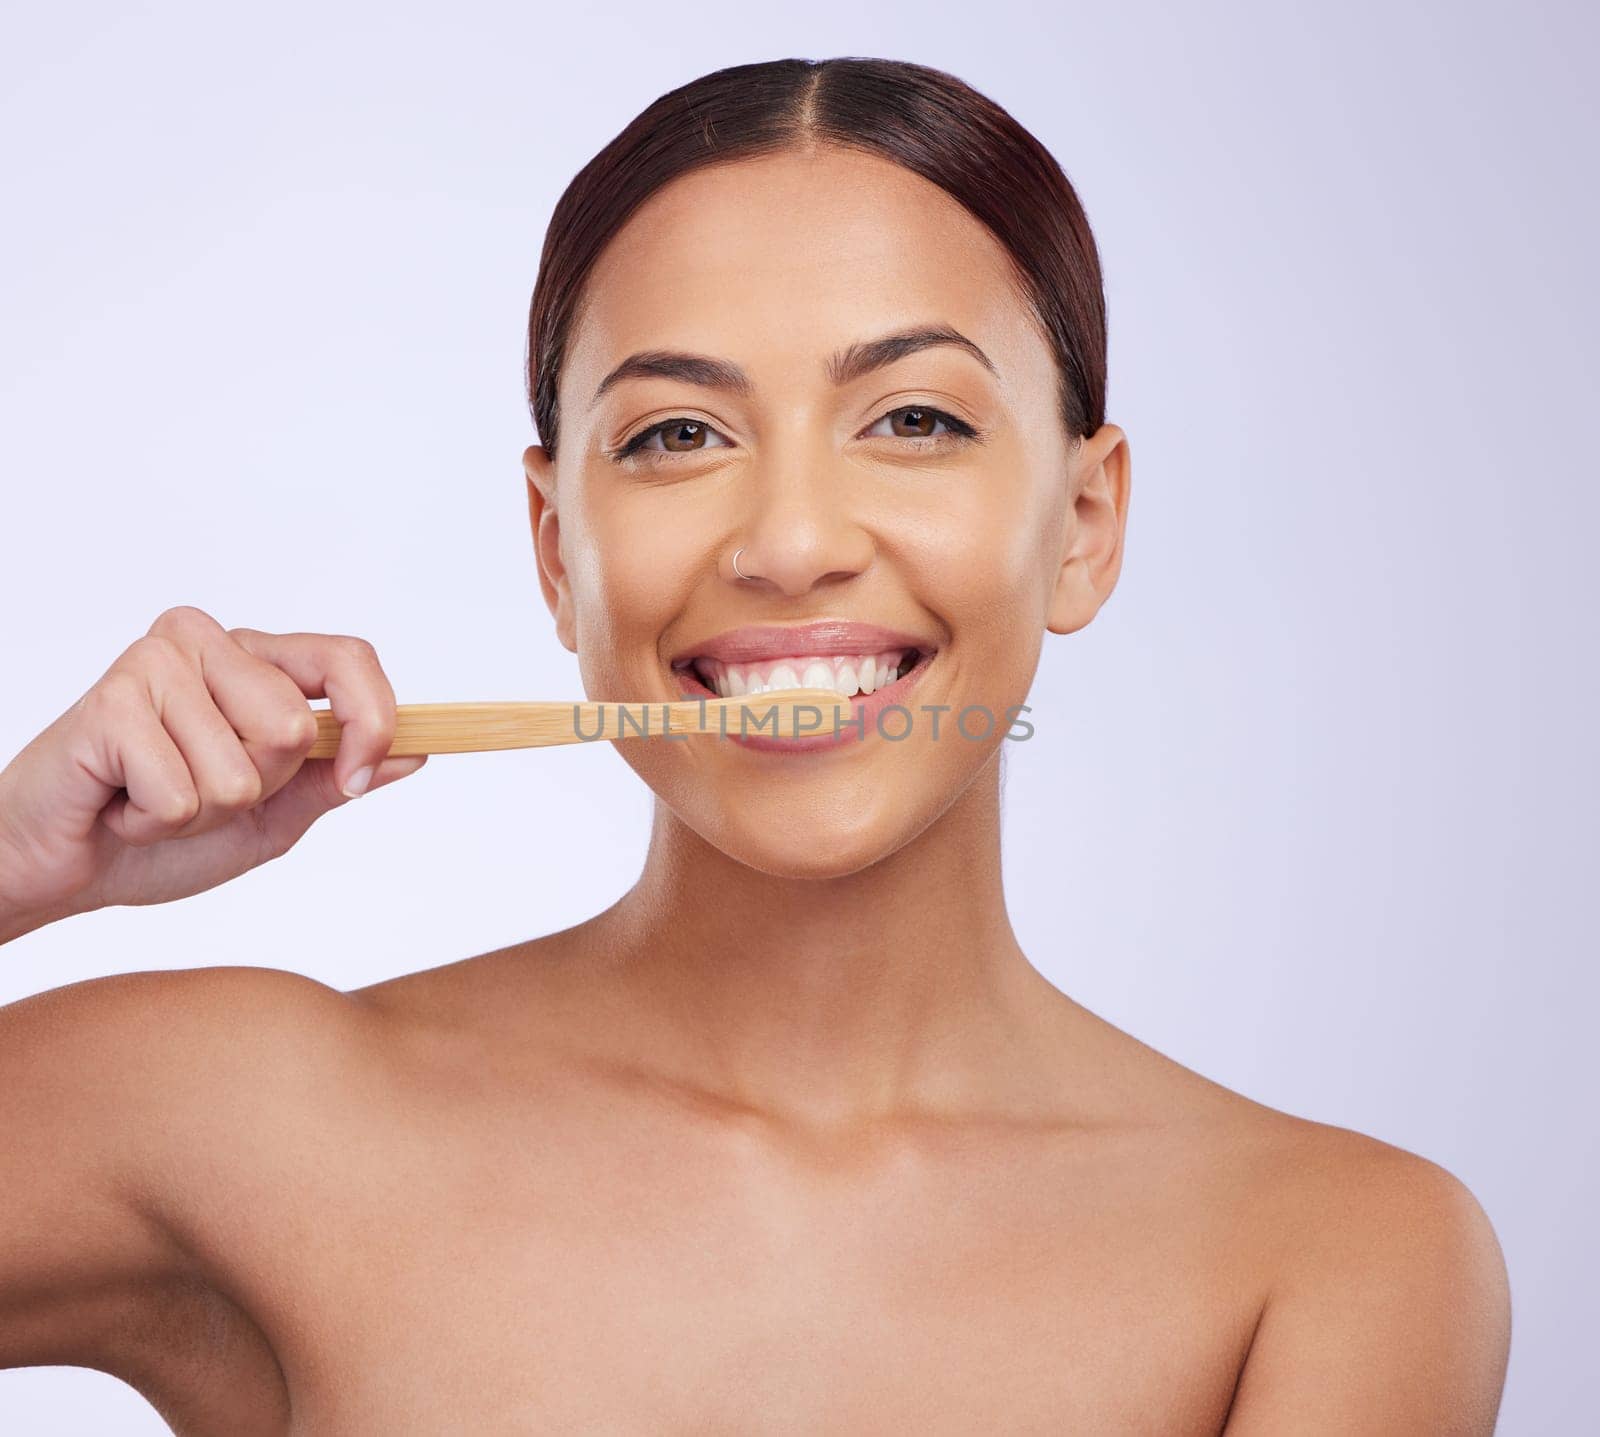 Portrait, dental or happy girl brushing teeth with smile for healthy oral hygiene in studio white background. Beauty or Brazilian woman model cleaning mouth with a natural bamboo wooden toothbrush.